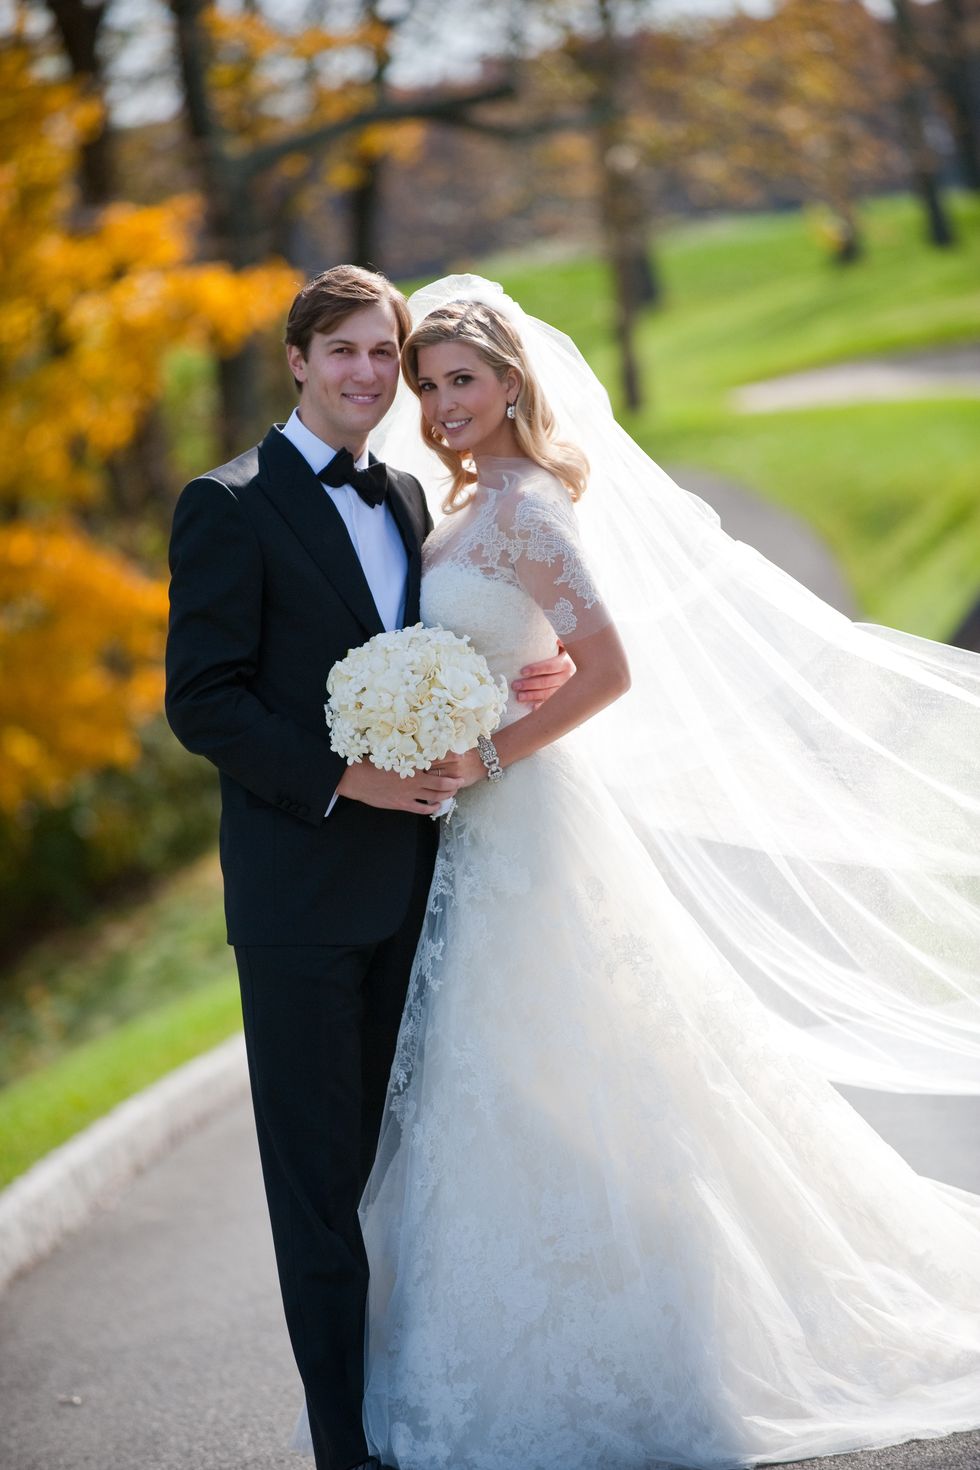 Ivanka Trump and Jared Kushner were married at the Trump National Golf Club on October 25, 2009.